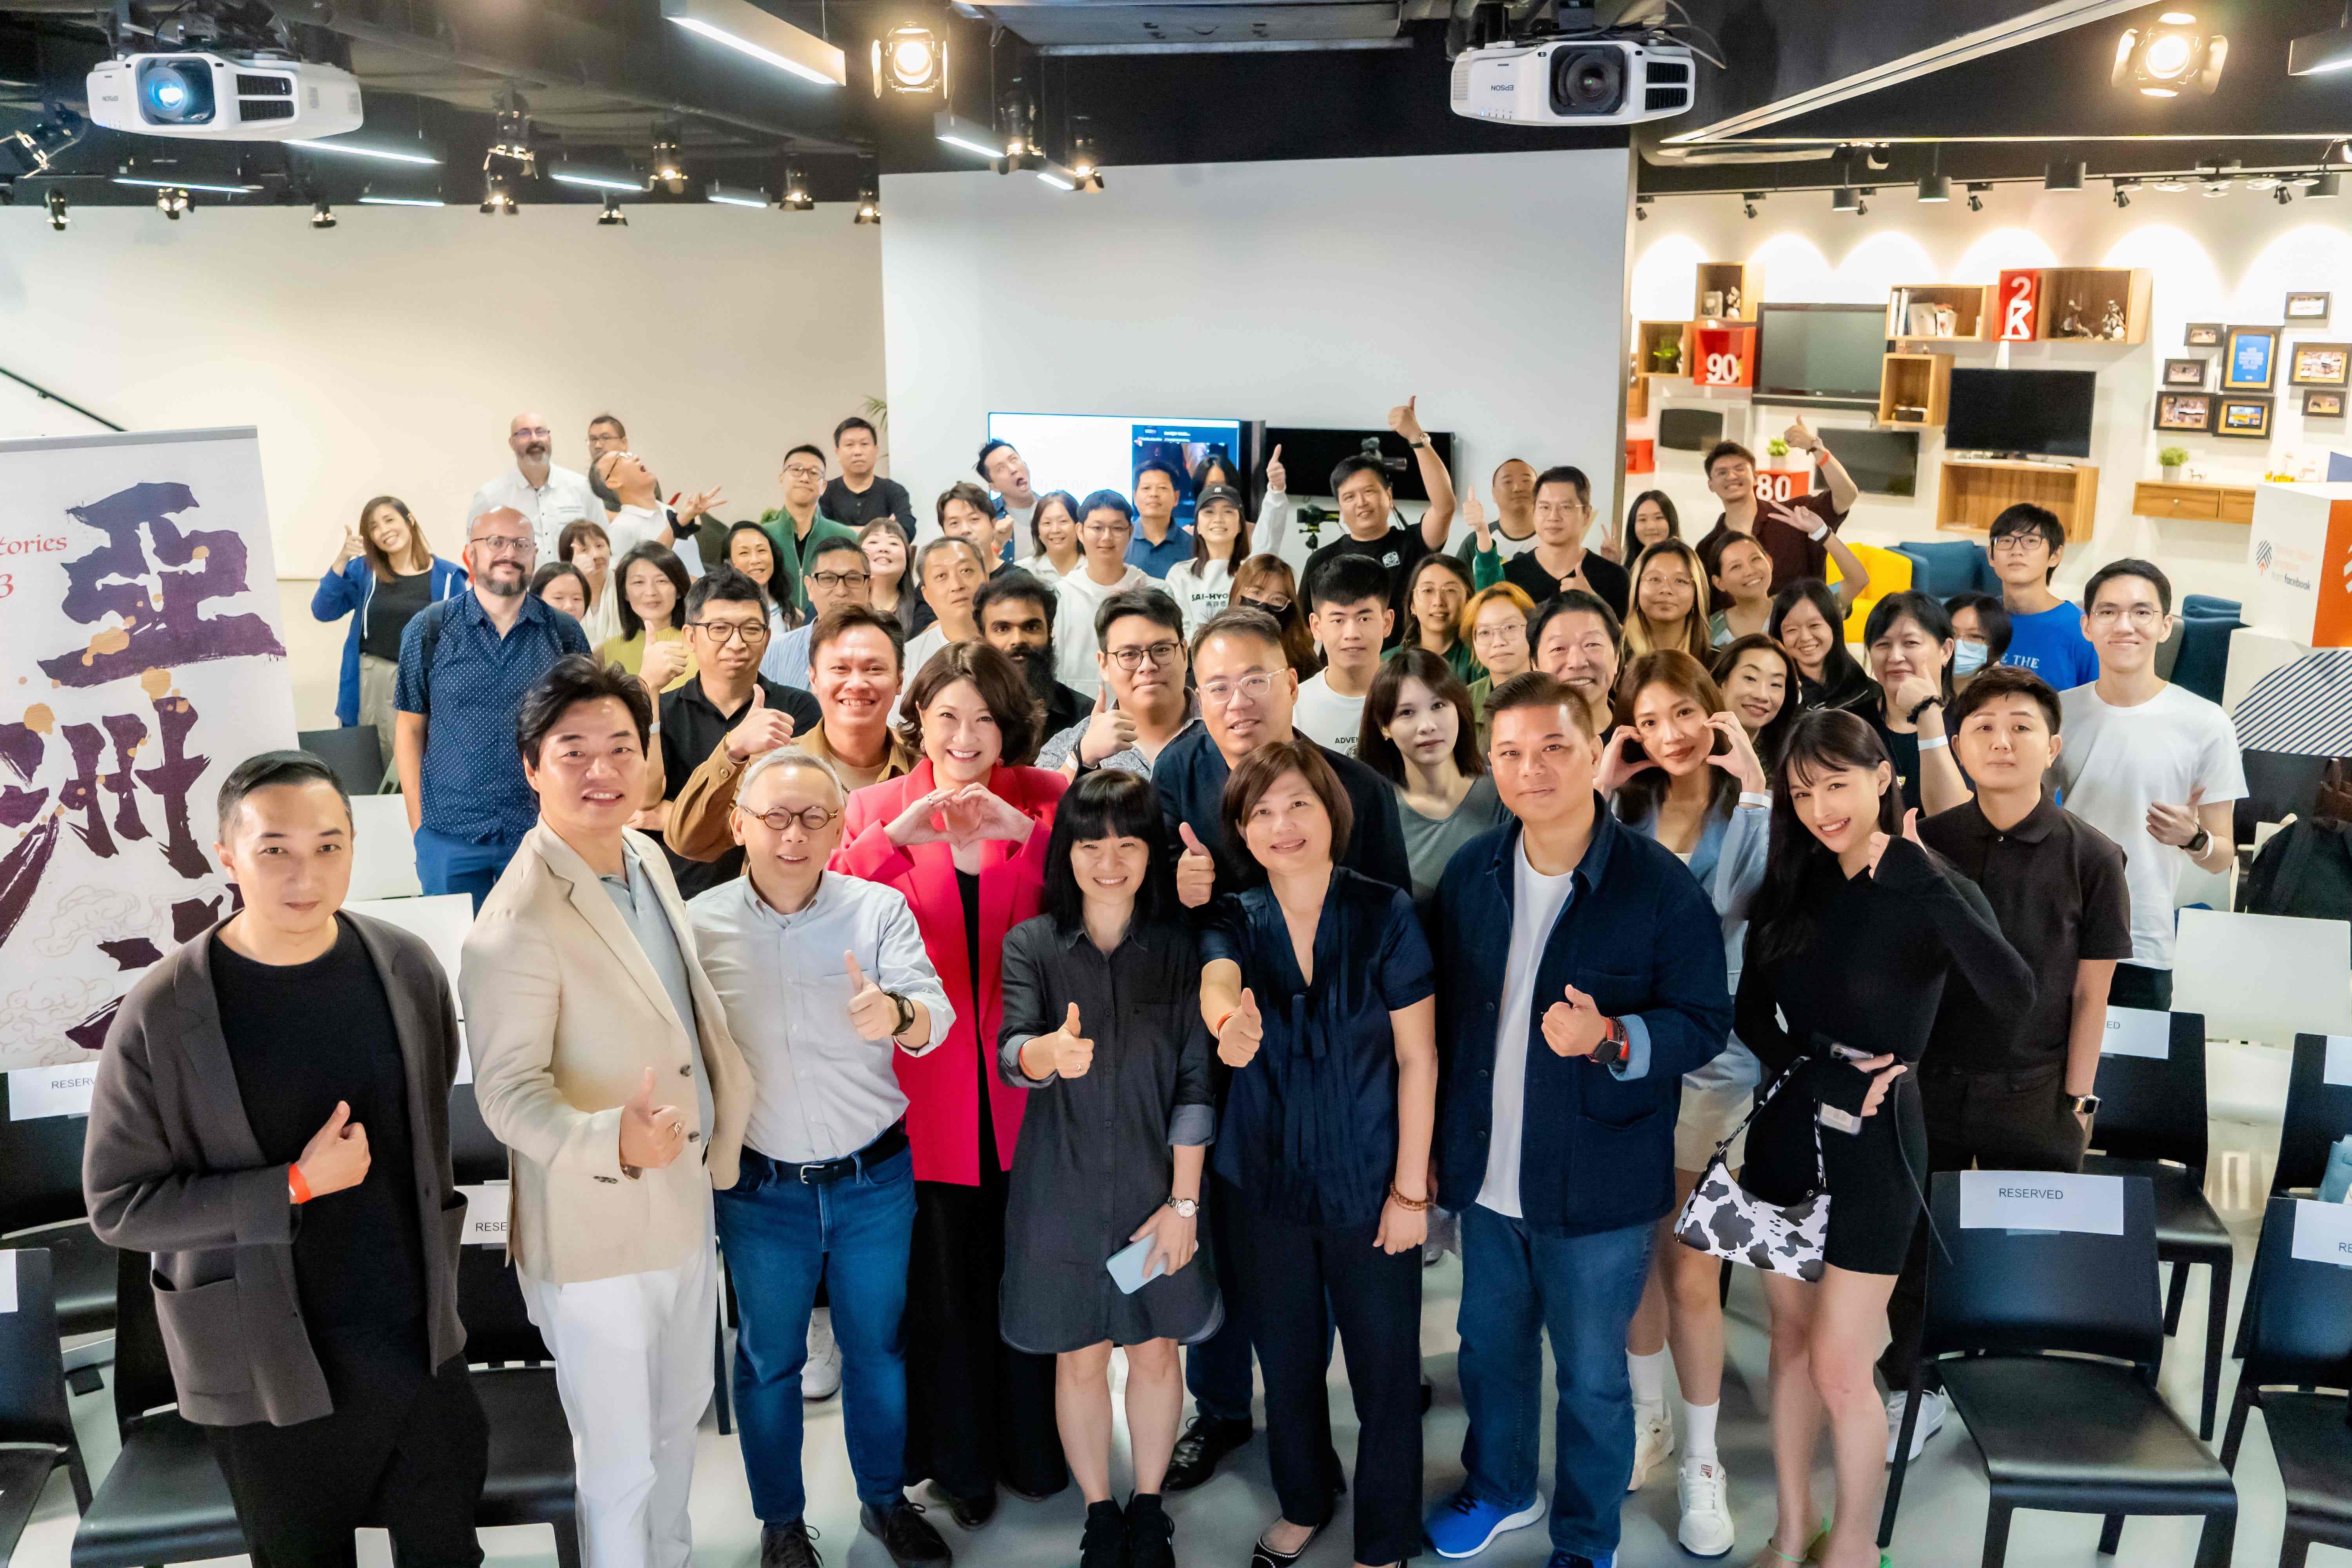 RisingStories 2023 ‘More Than Just Stories’ assembles media professionals from the UK, South Korea, Taiwan, and Singapore to discuss the state of global content creation